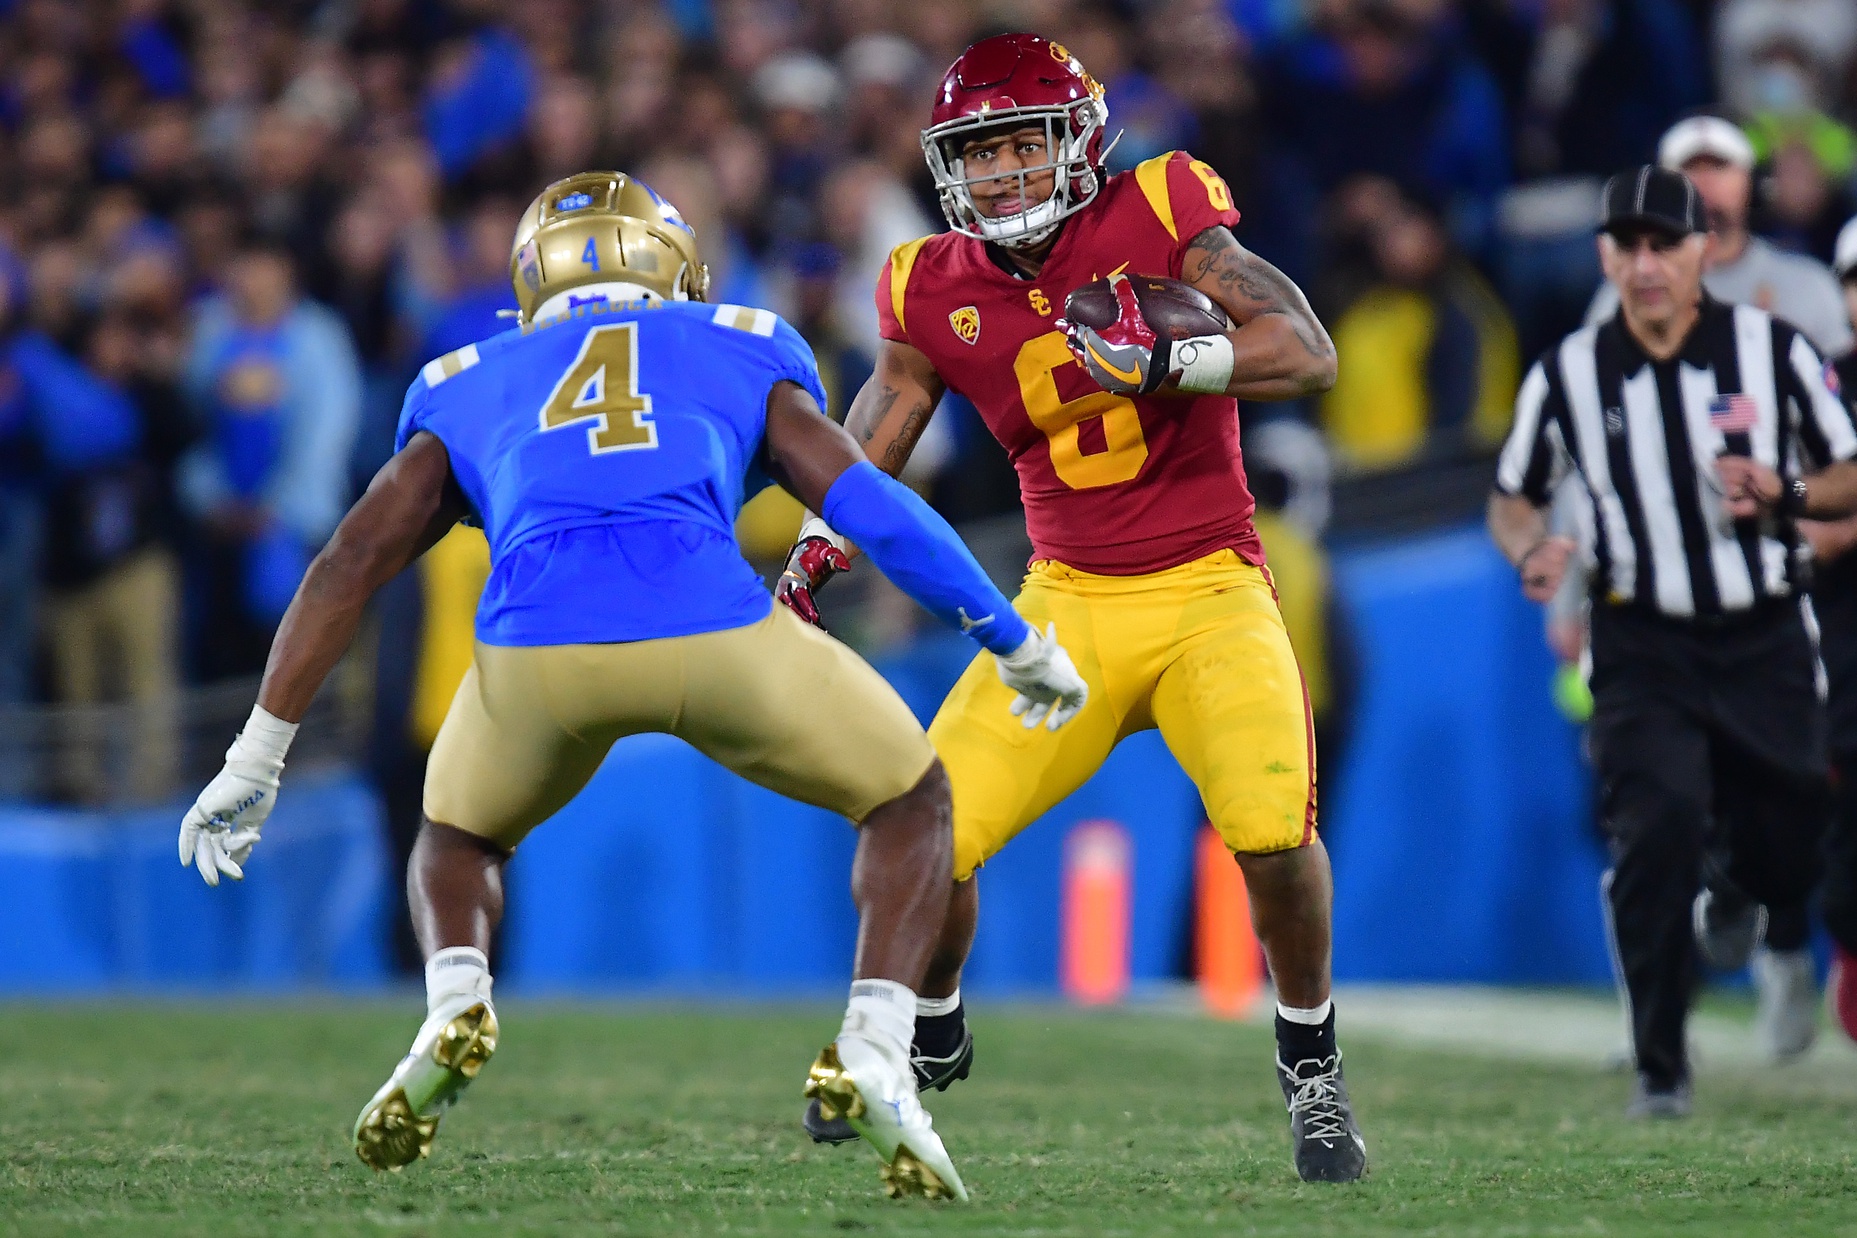 UCLA-USC football conference realignment